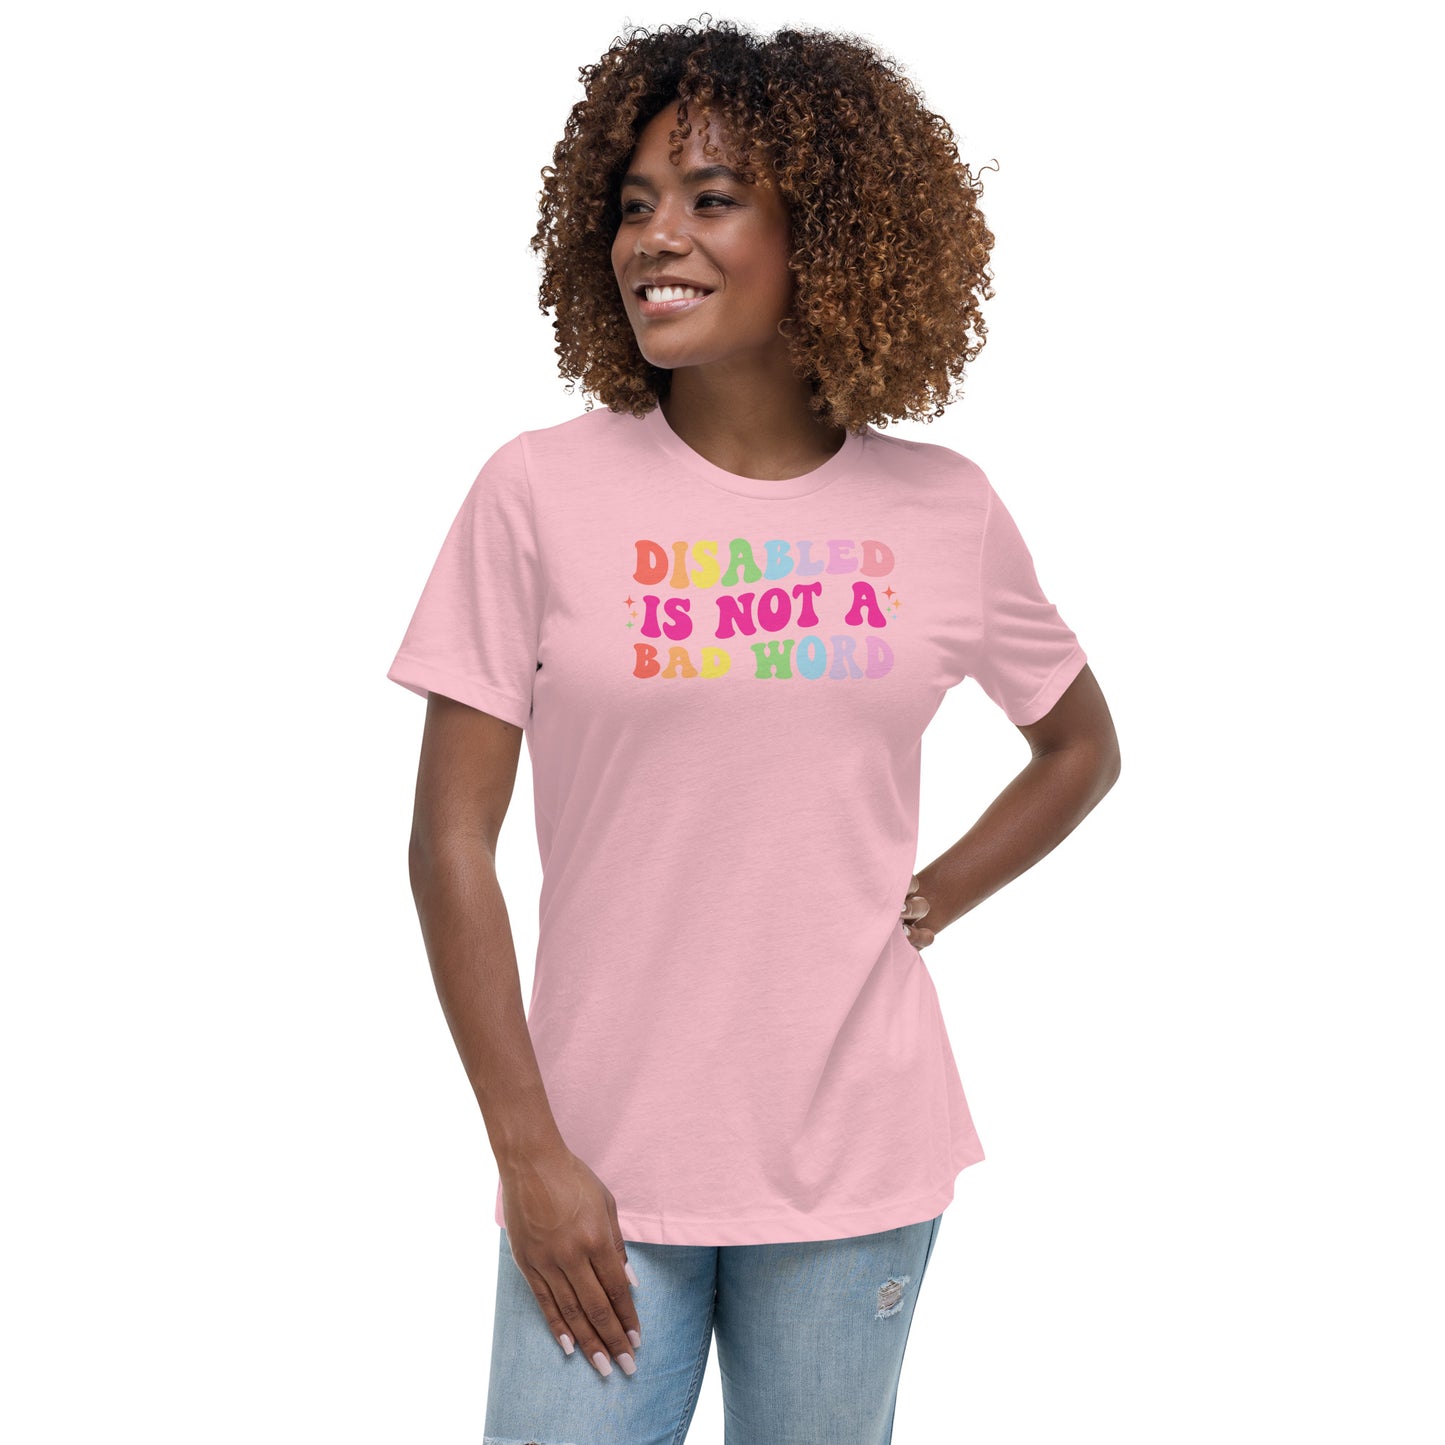 Disabled is Not a Bad Word - Women’s T-shirt